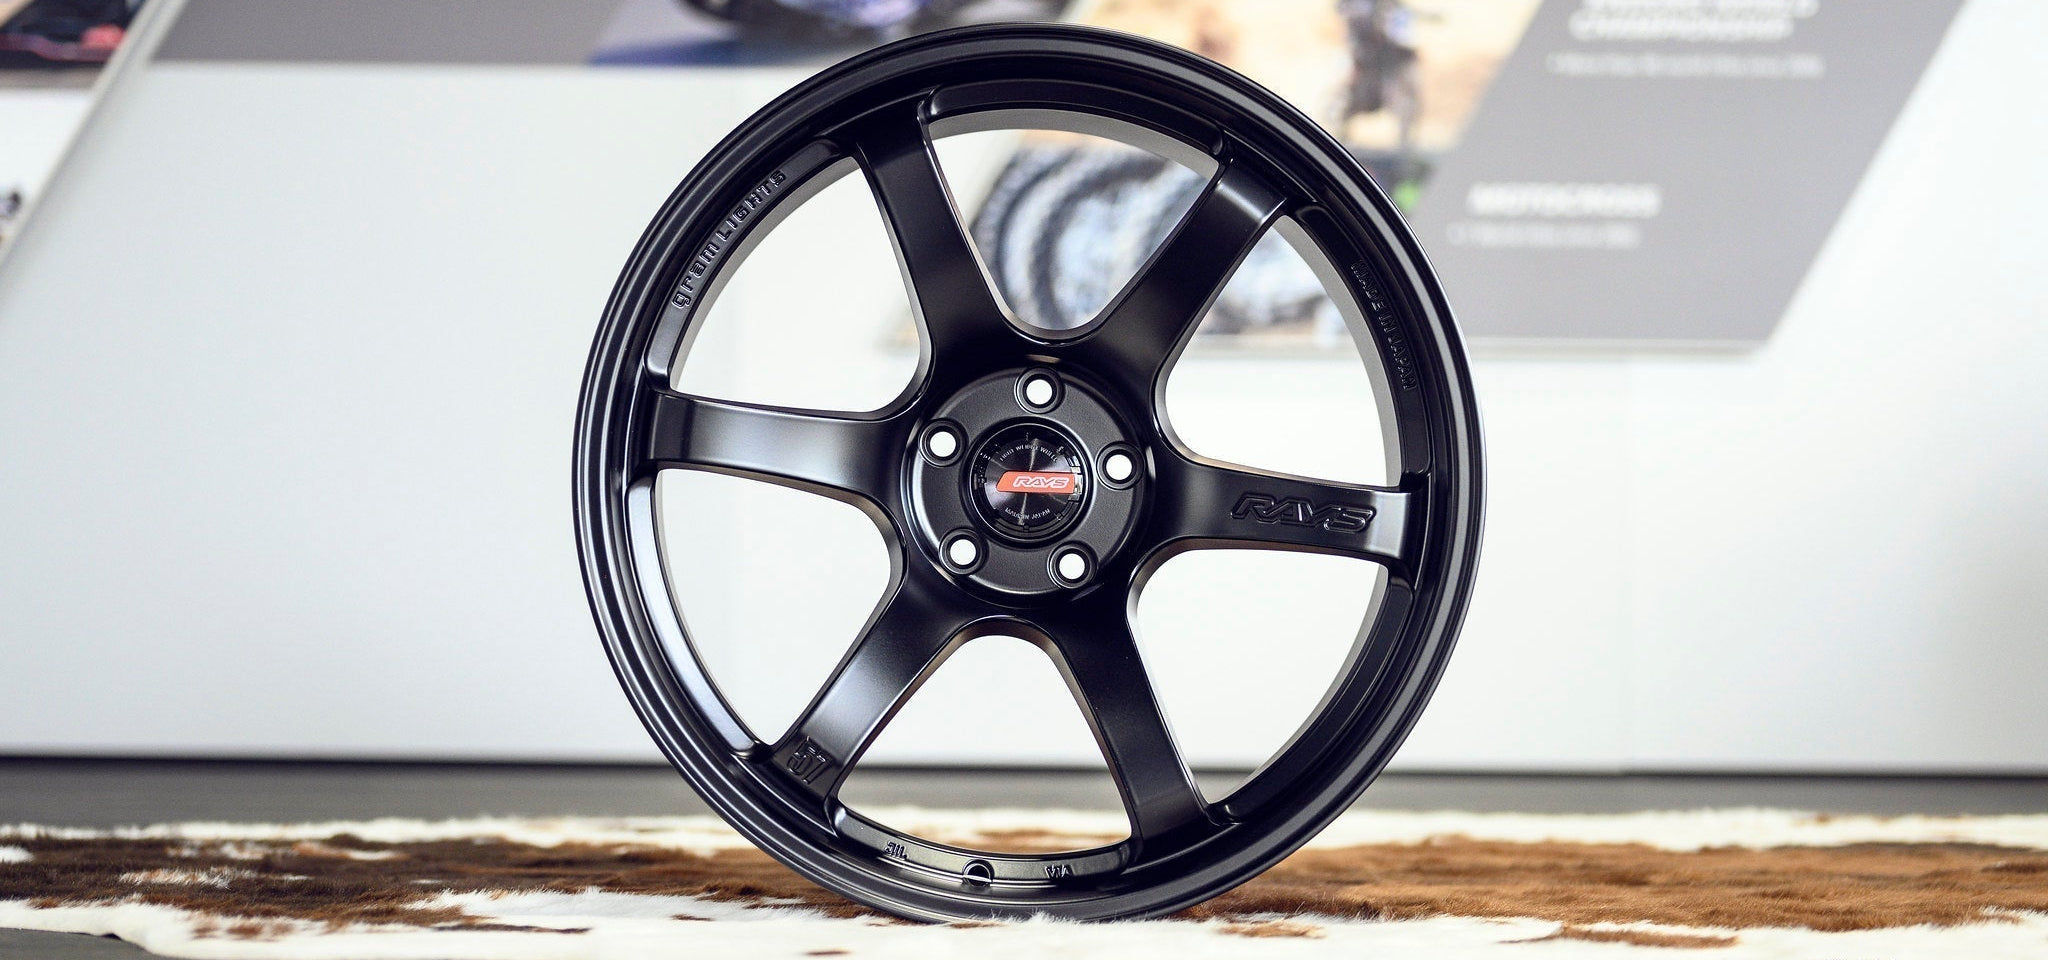 gramLIGHTS 57DR 15" - Premium Wheels from Gram Lights - From just $1790.0! Shop now at MK MOTORSPORTS